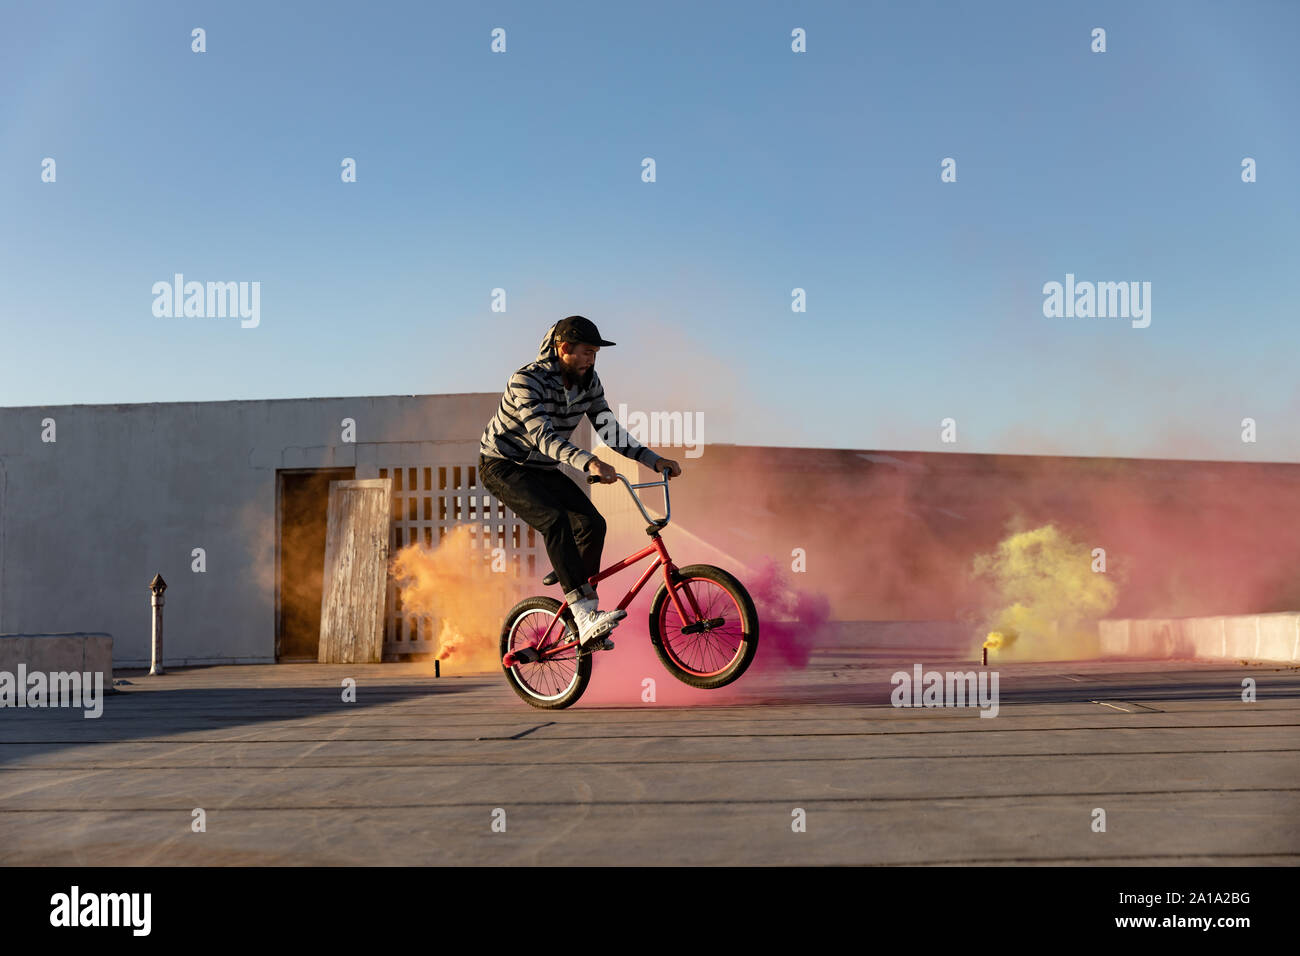 BMX rider on a rooftop using smoke grenades Stock Photo